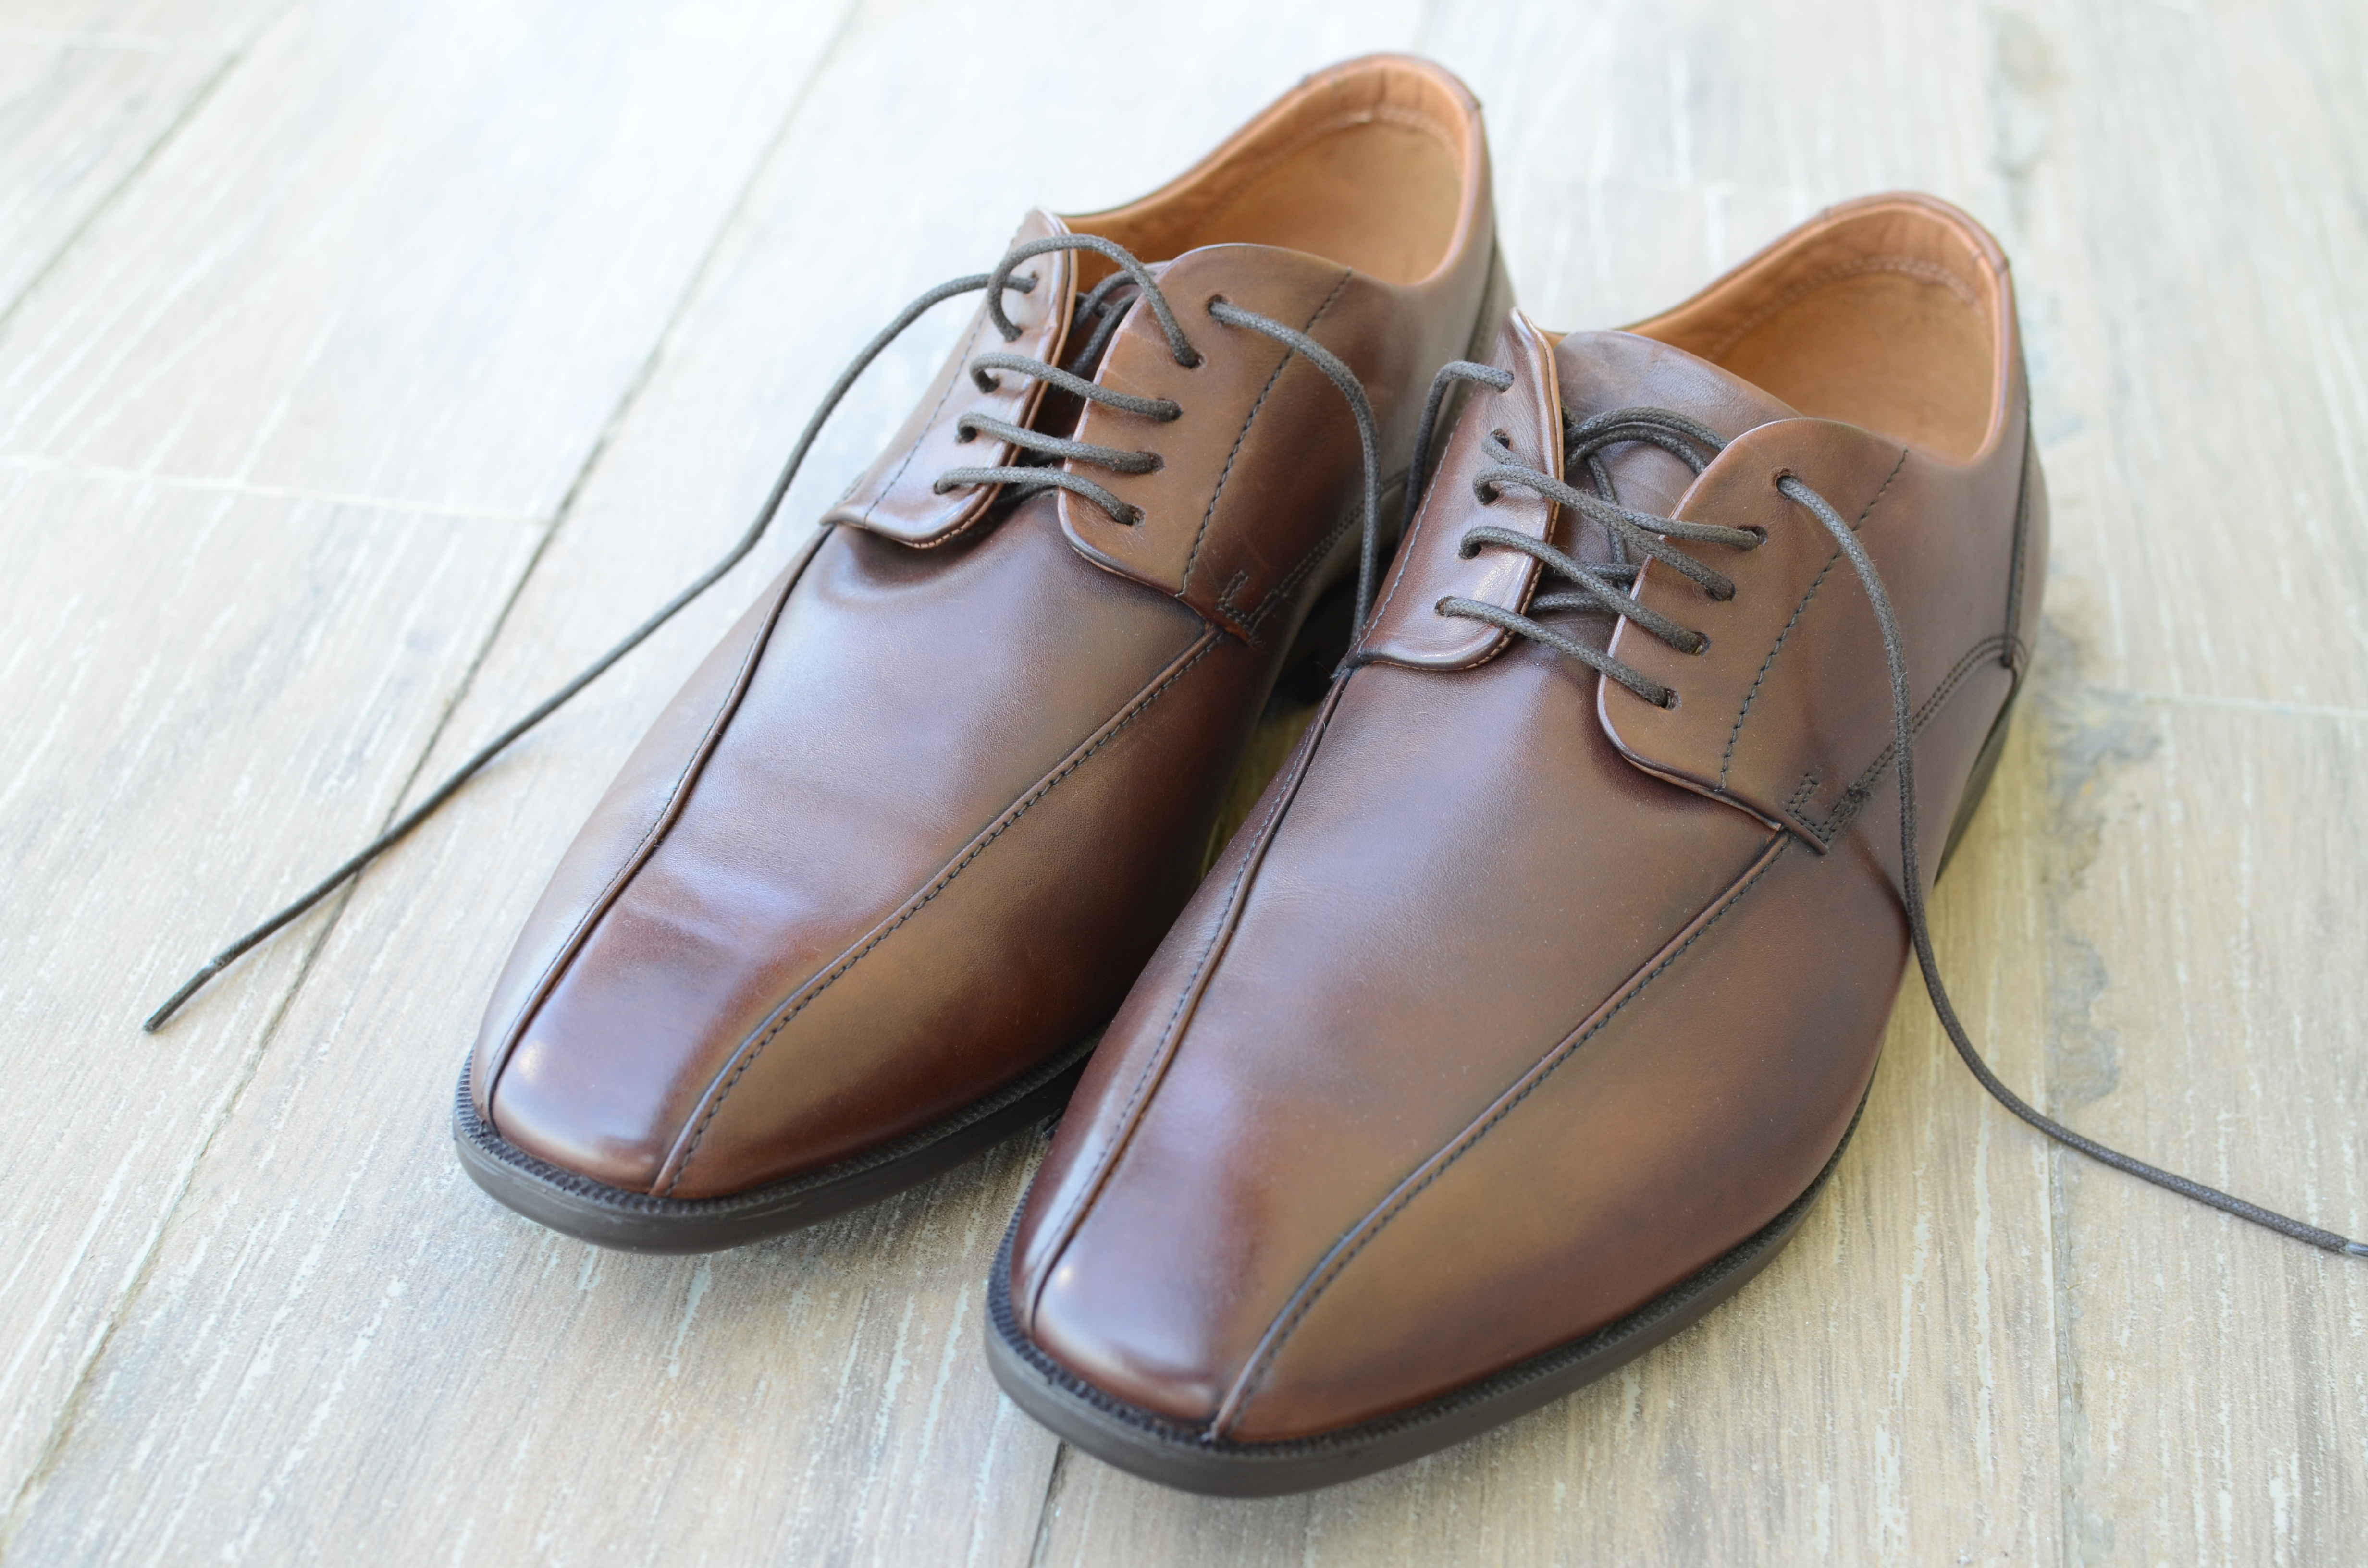 Business shoes on wood floor photo